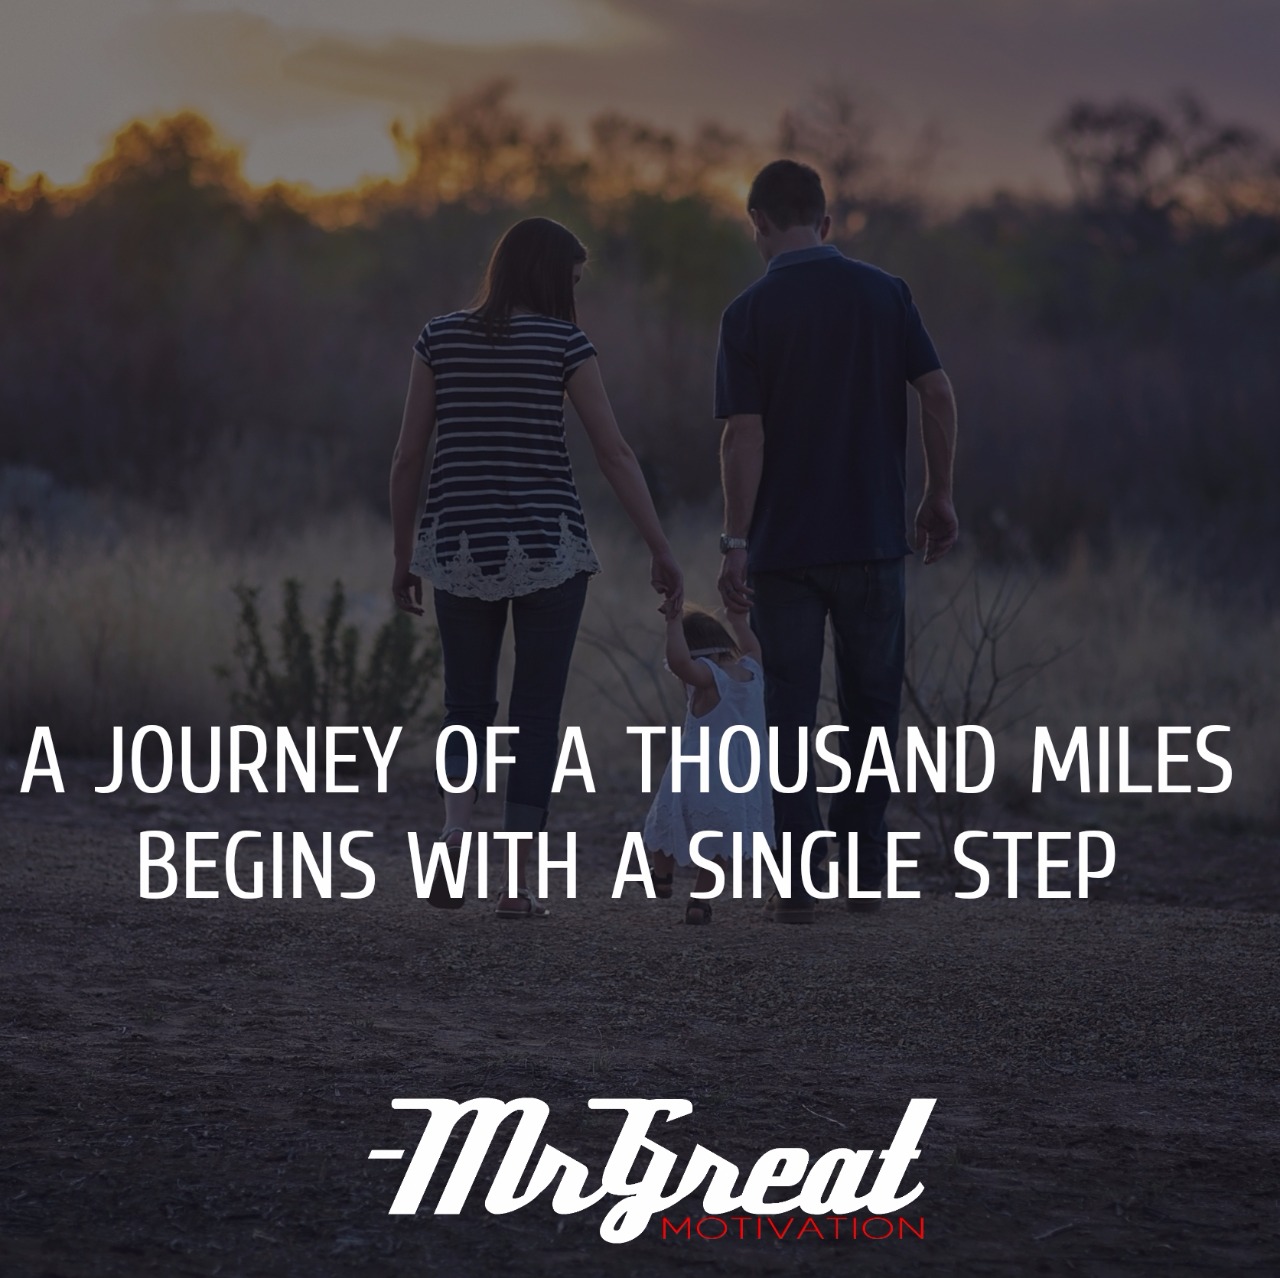 THE JOURNEY OF A THOUSAND MILES BEGINS WITH SINGLE STEP